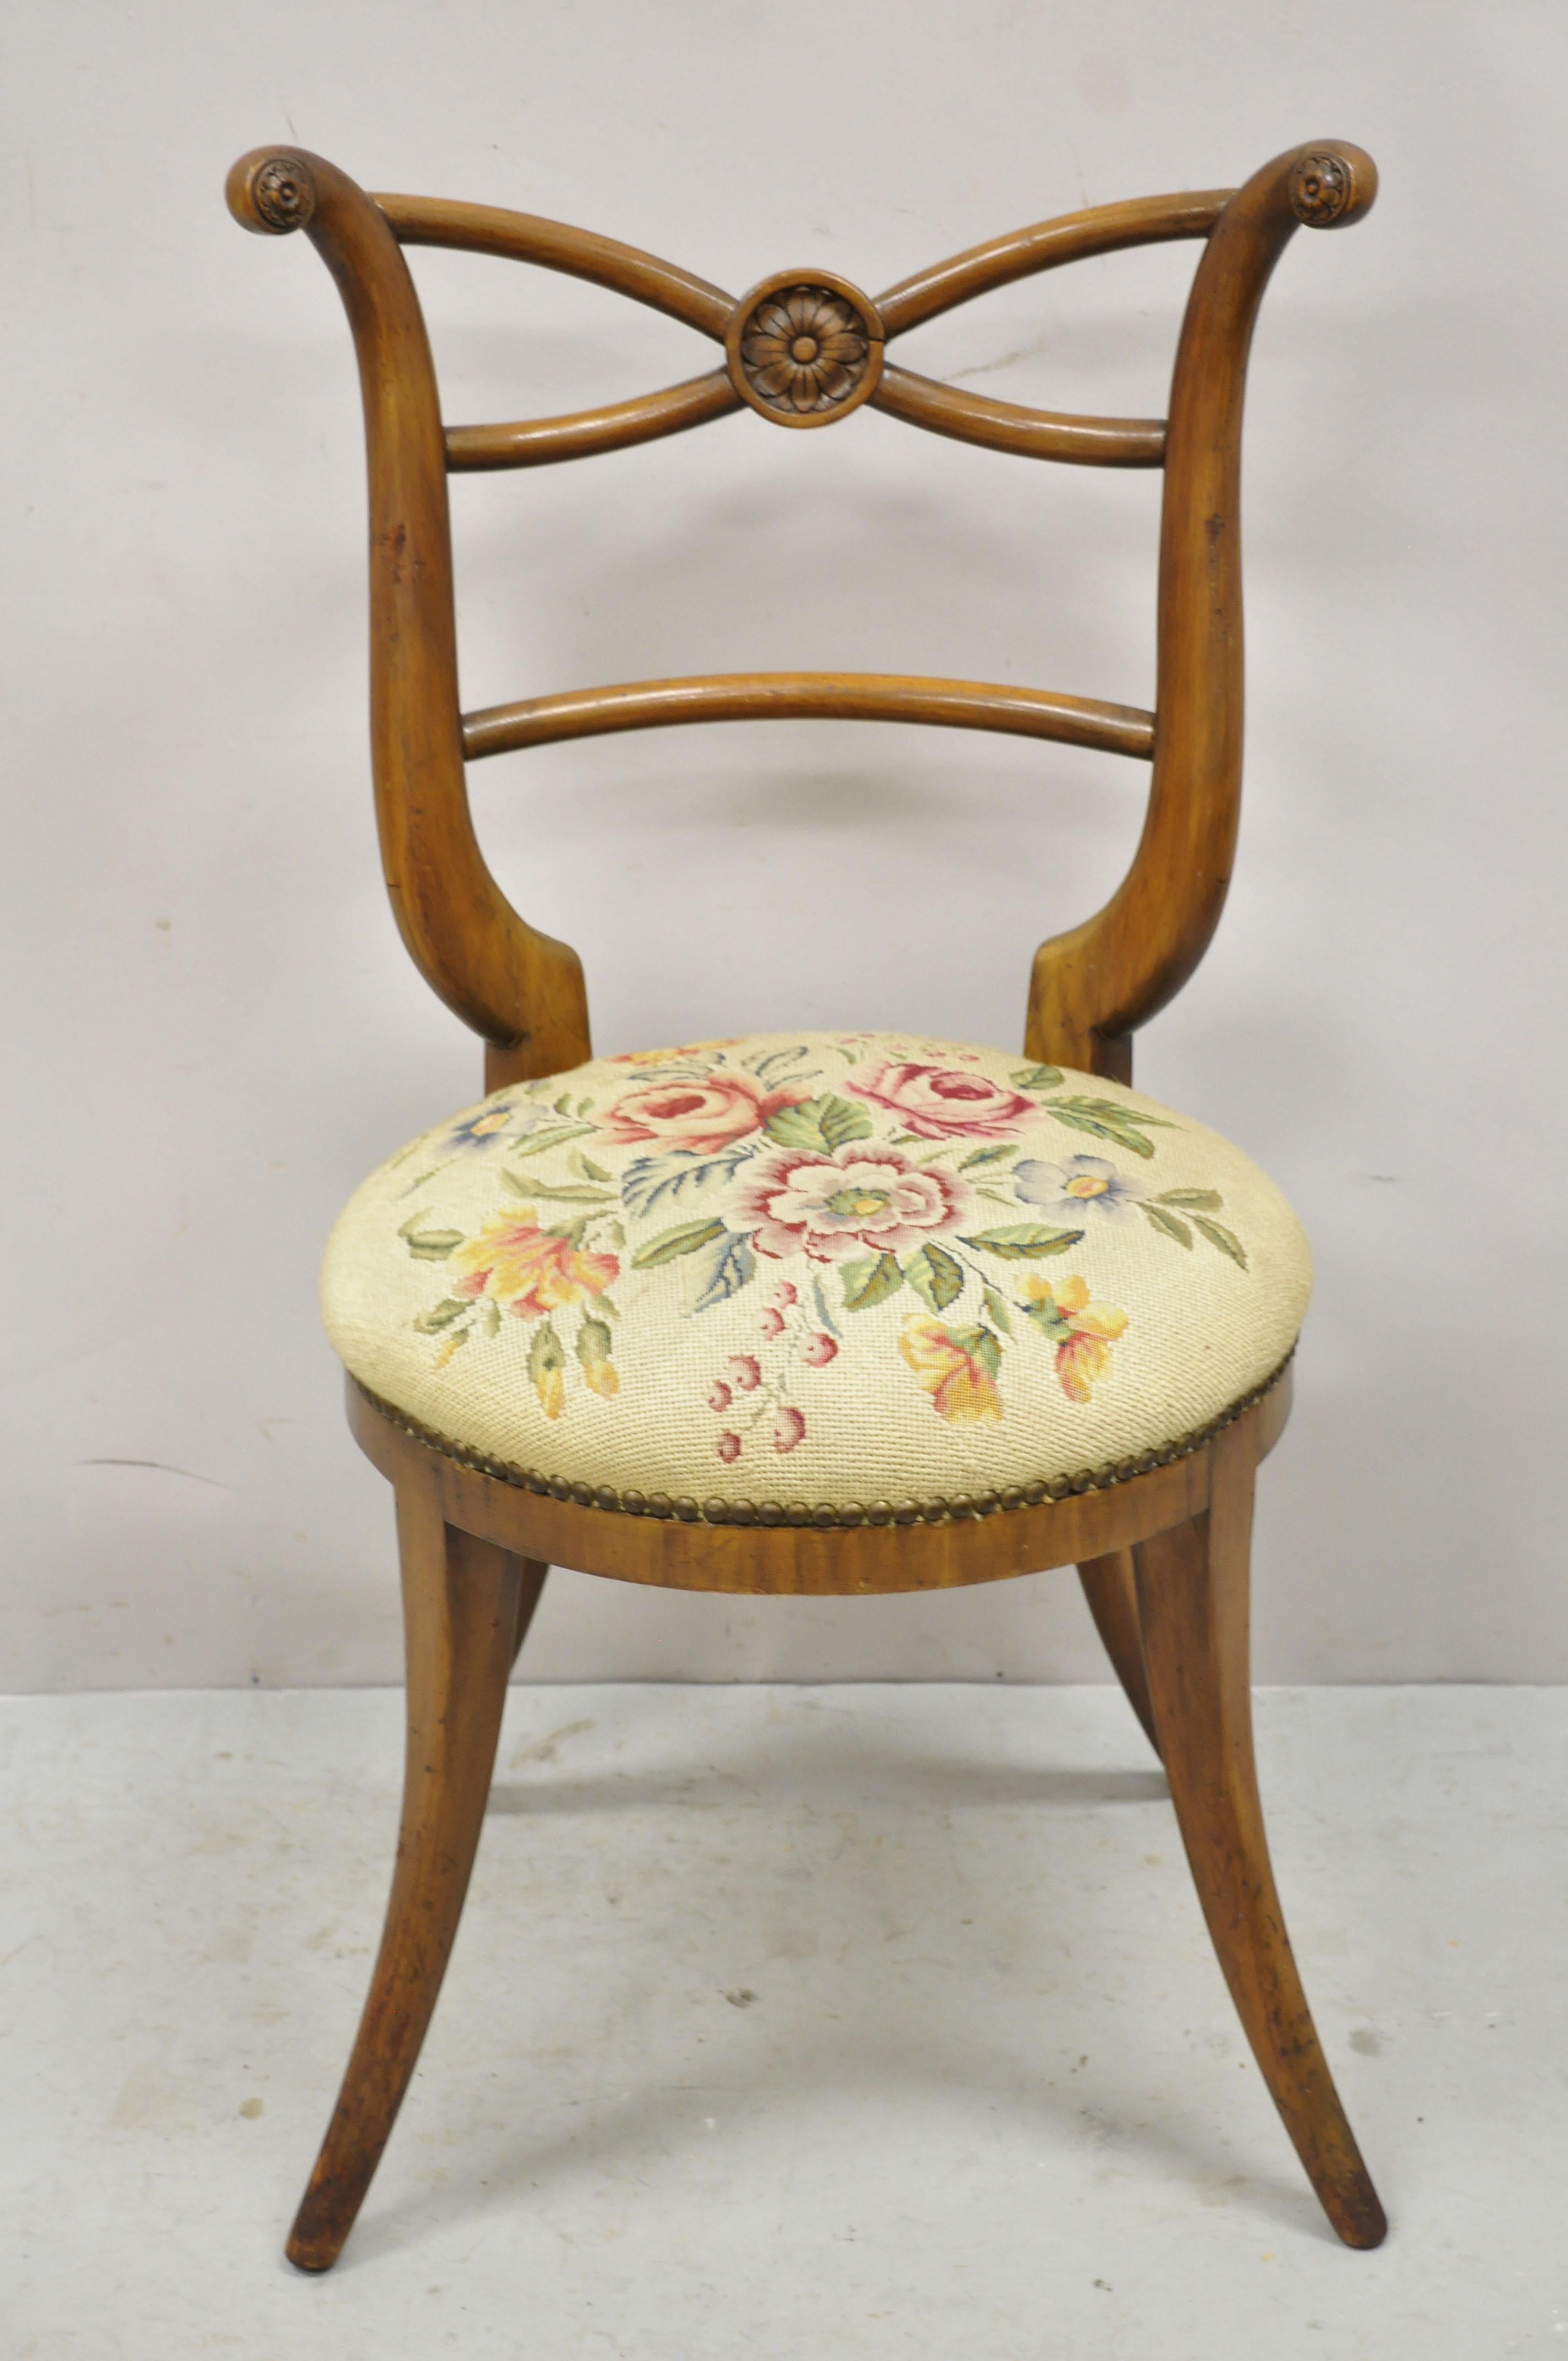 Vintage Italian Biedermeier Saber Leg Accent Side Chair with Needlepoint Seat. Item features needlepoint upholstered seat, solid wood frame, nicely carved details, shapely saber legs, great style and form. Circa Early to Mid 1900s. Measurements: 34